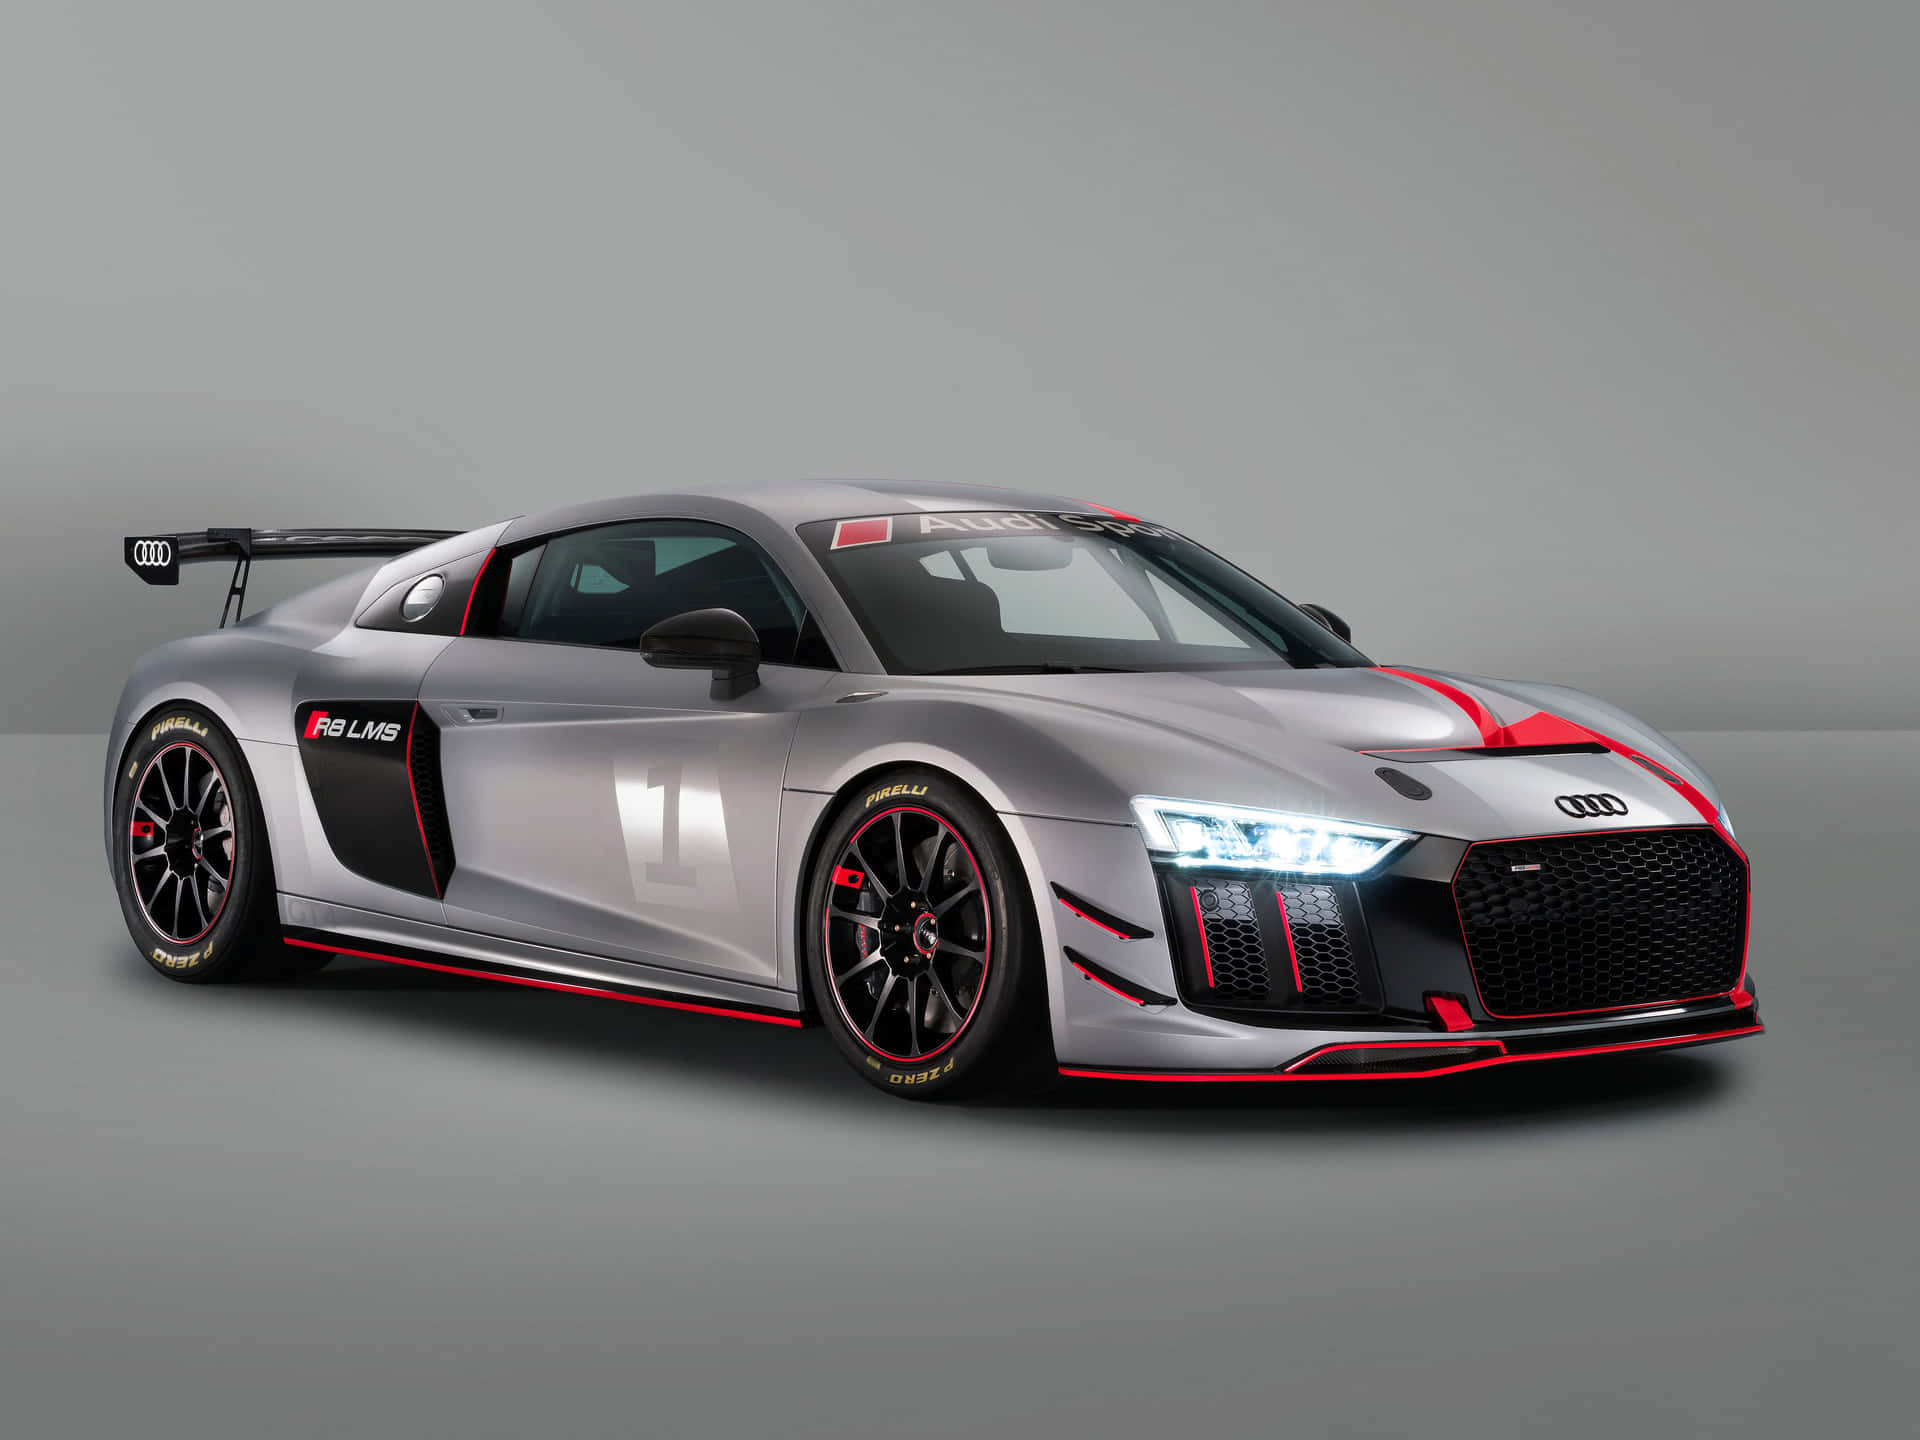 Audir8 Gt3 R8 Gt3 R8 Gt3 R8 Gt3 Would Translate To 